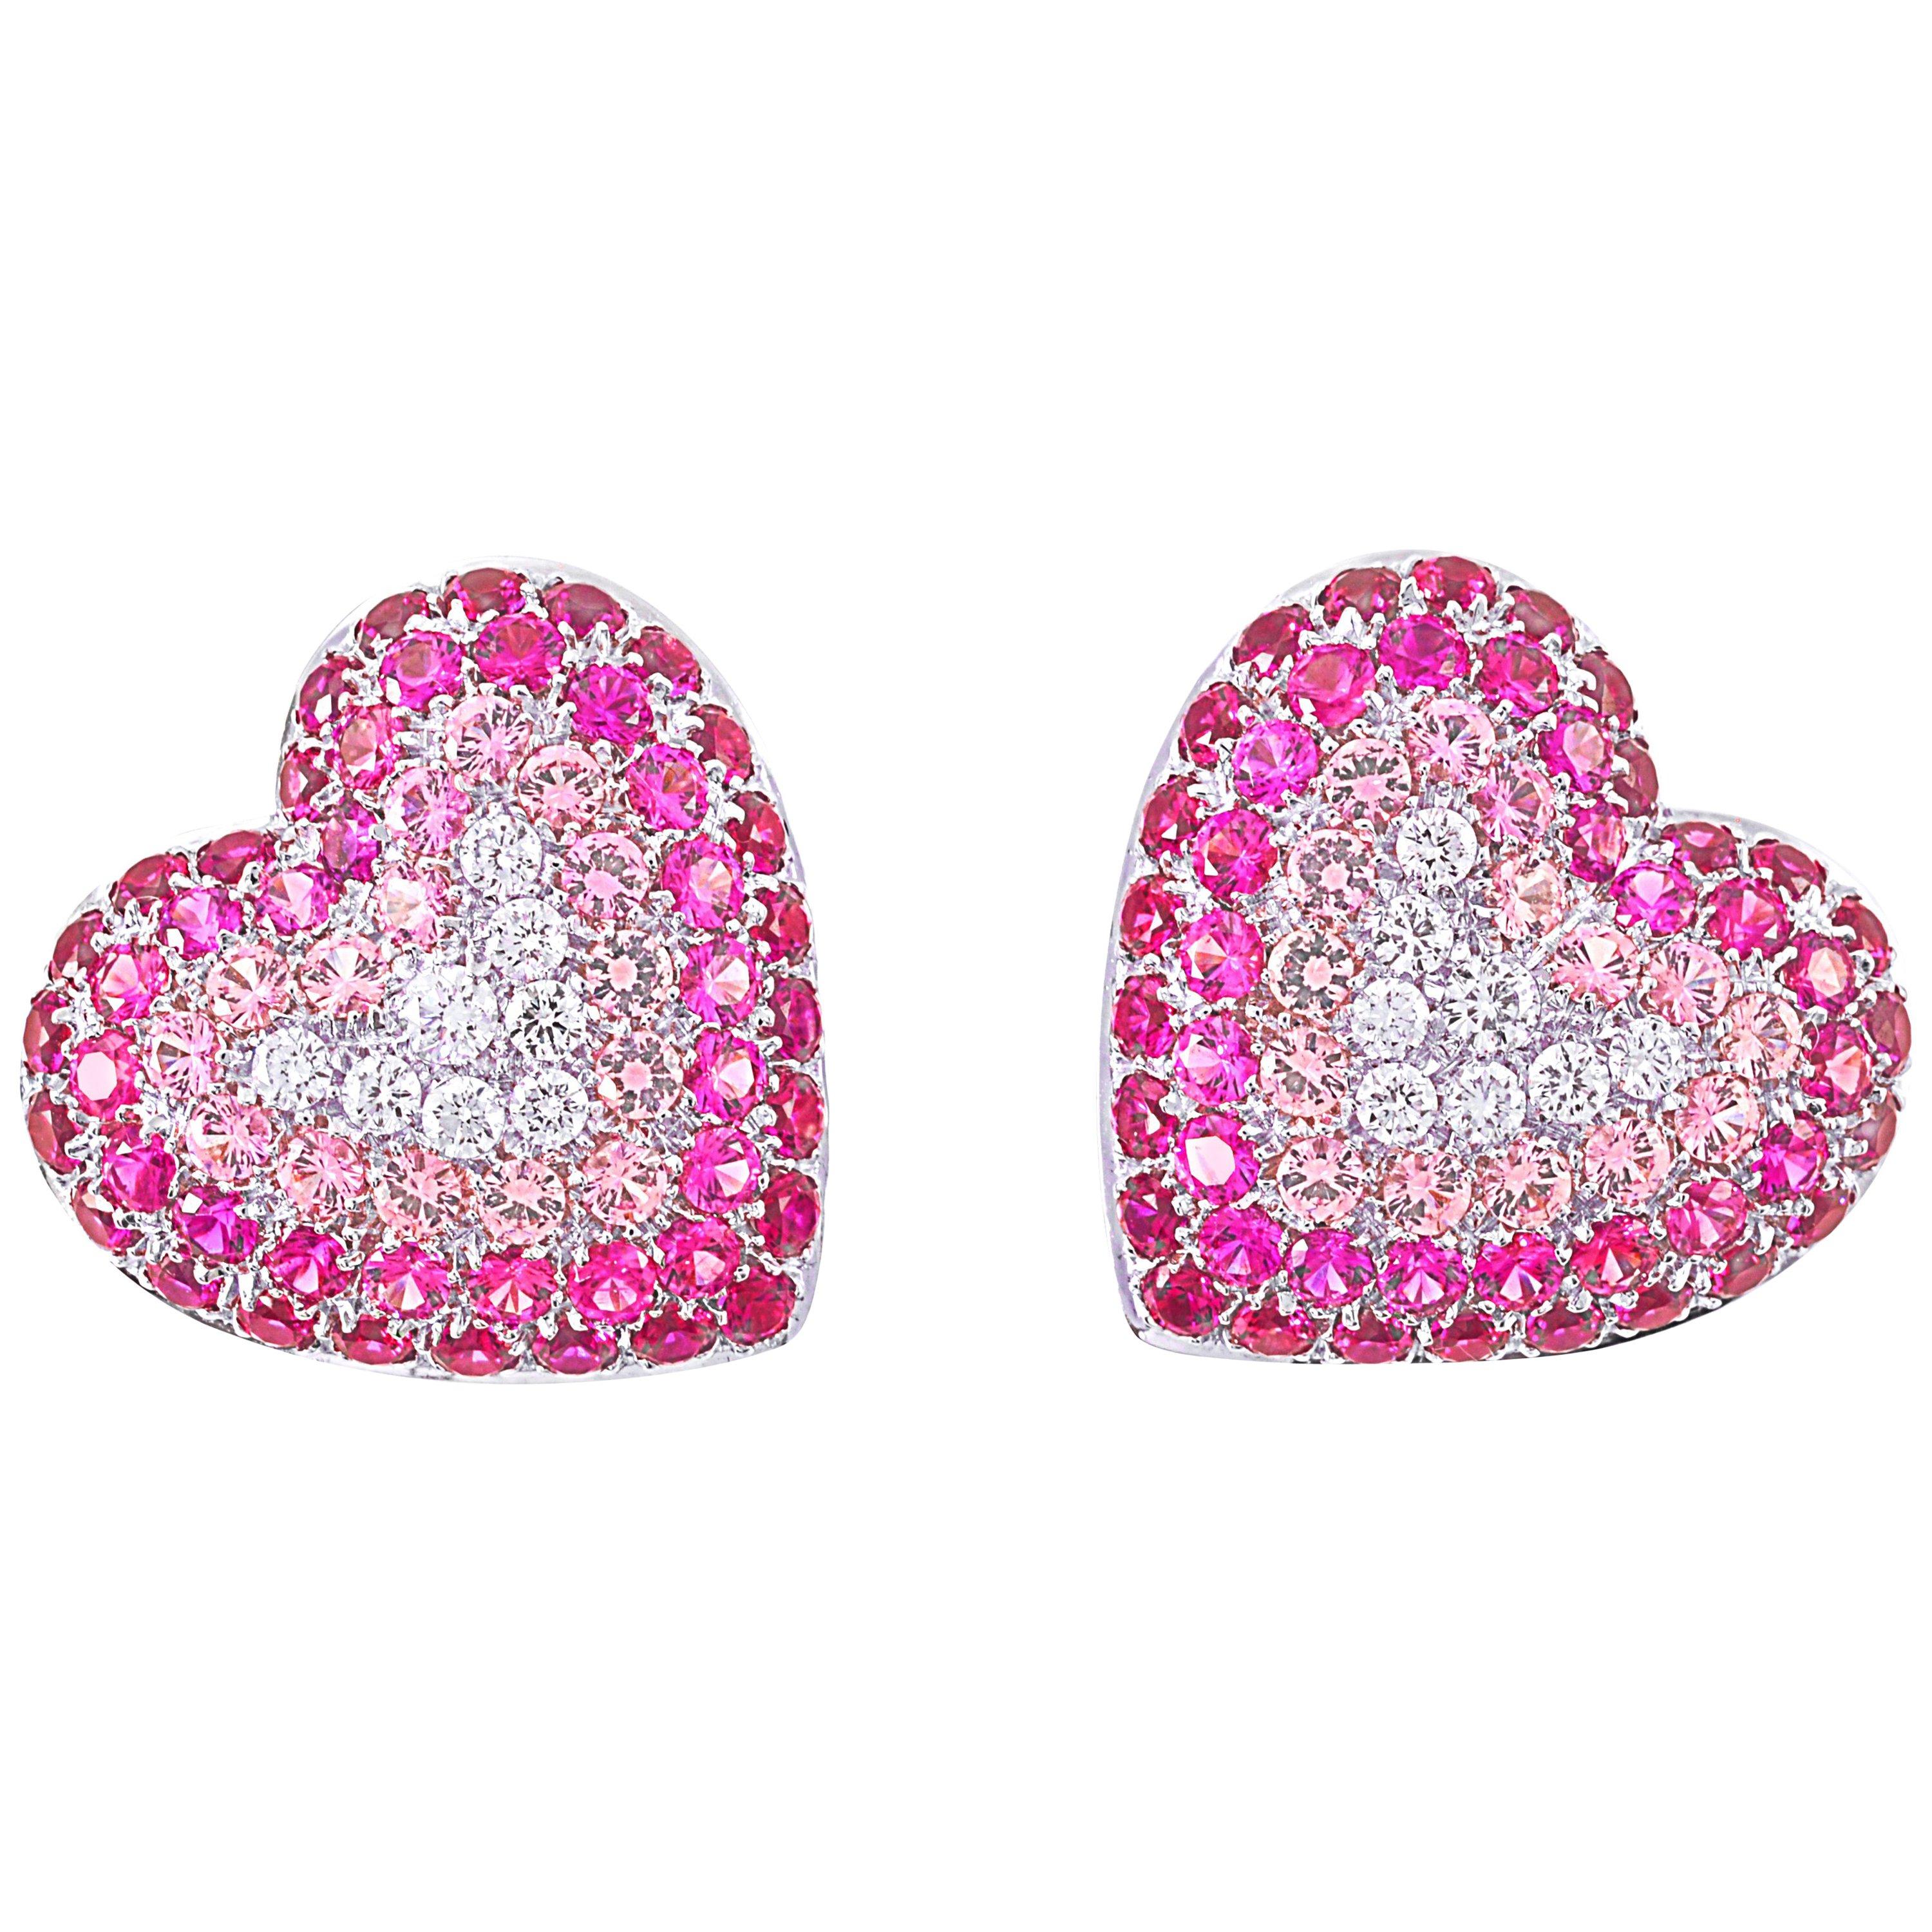 Picchiotti White Gold Diamonds, Rubies and Pink Sapphire Heart-Shaped Earrings im Angebot